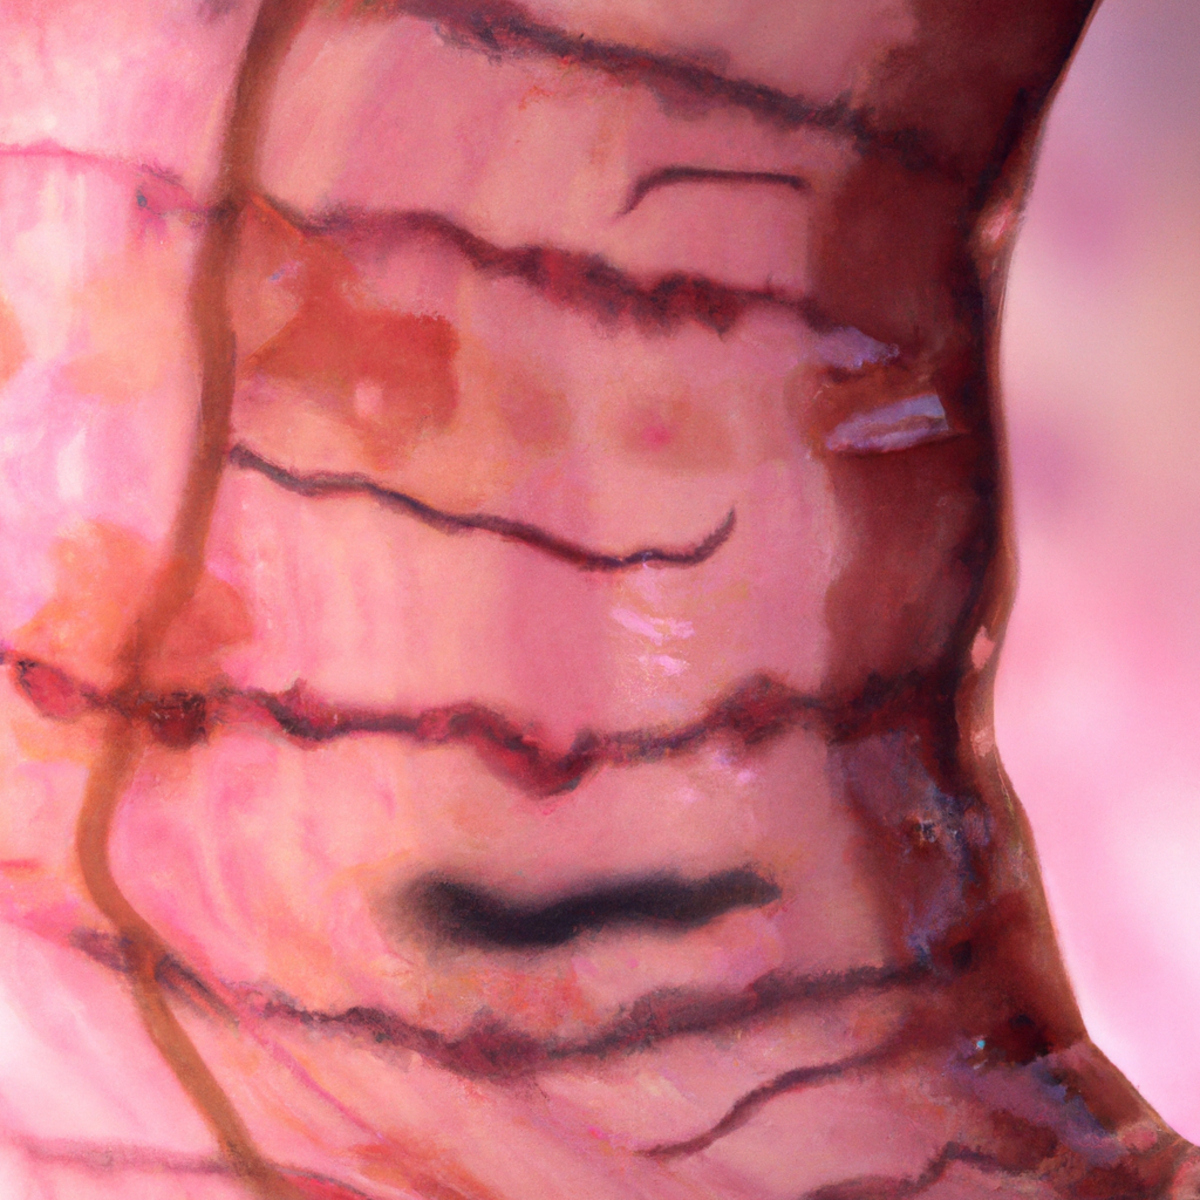 Close-up of human stomach showing dilated blood vessels and abnormal vascular ectasia, aiding medical professionals and researchers - Gastric antral vascular ectasia (GAVE)